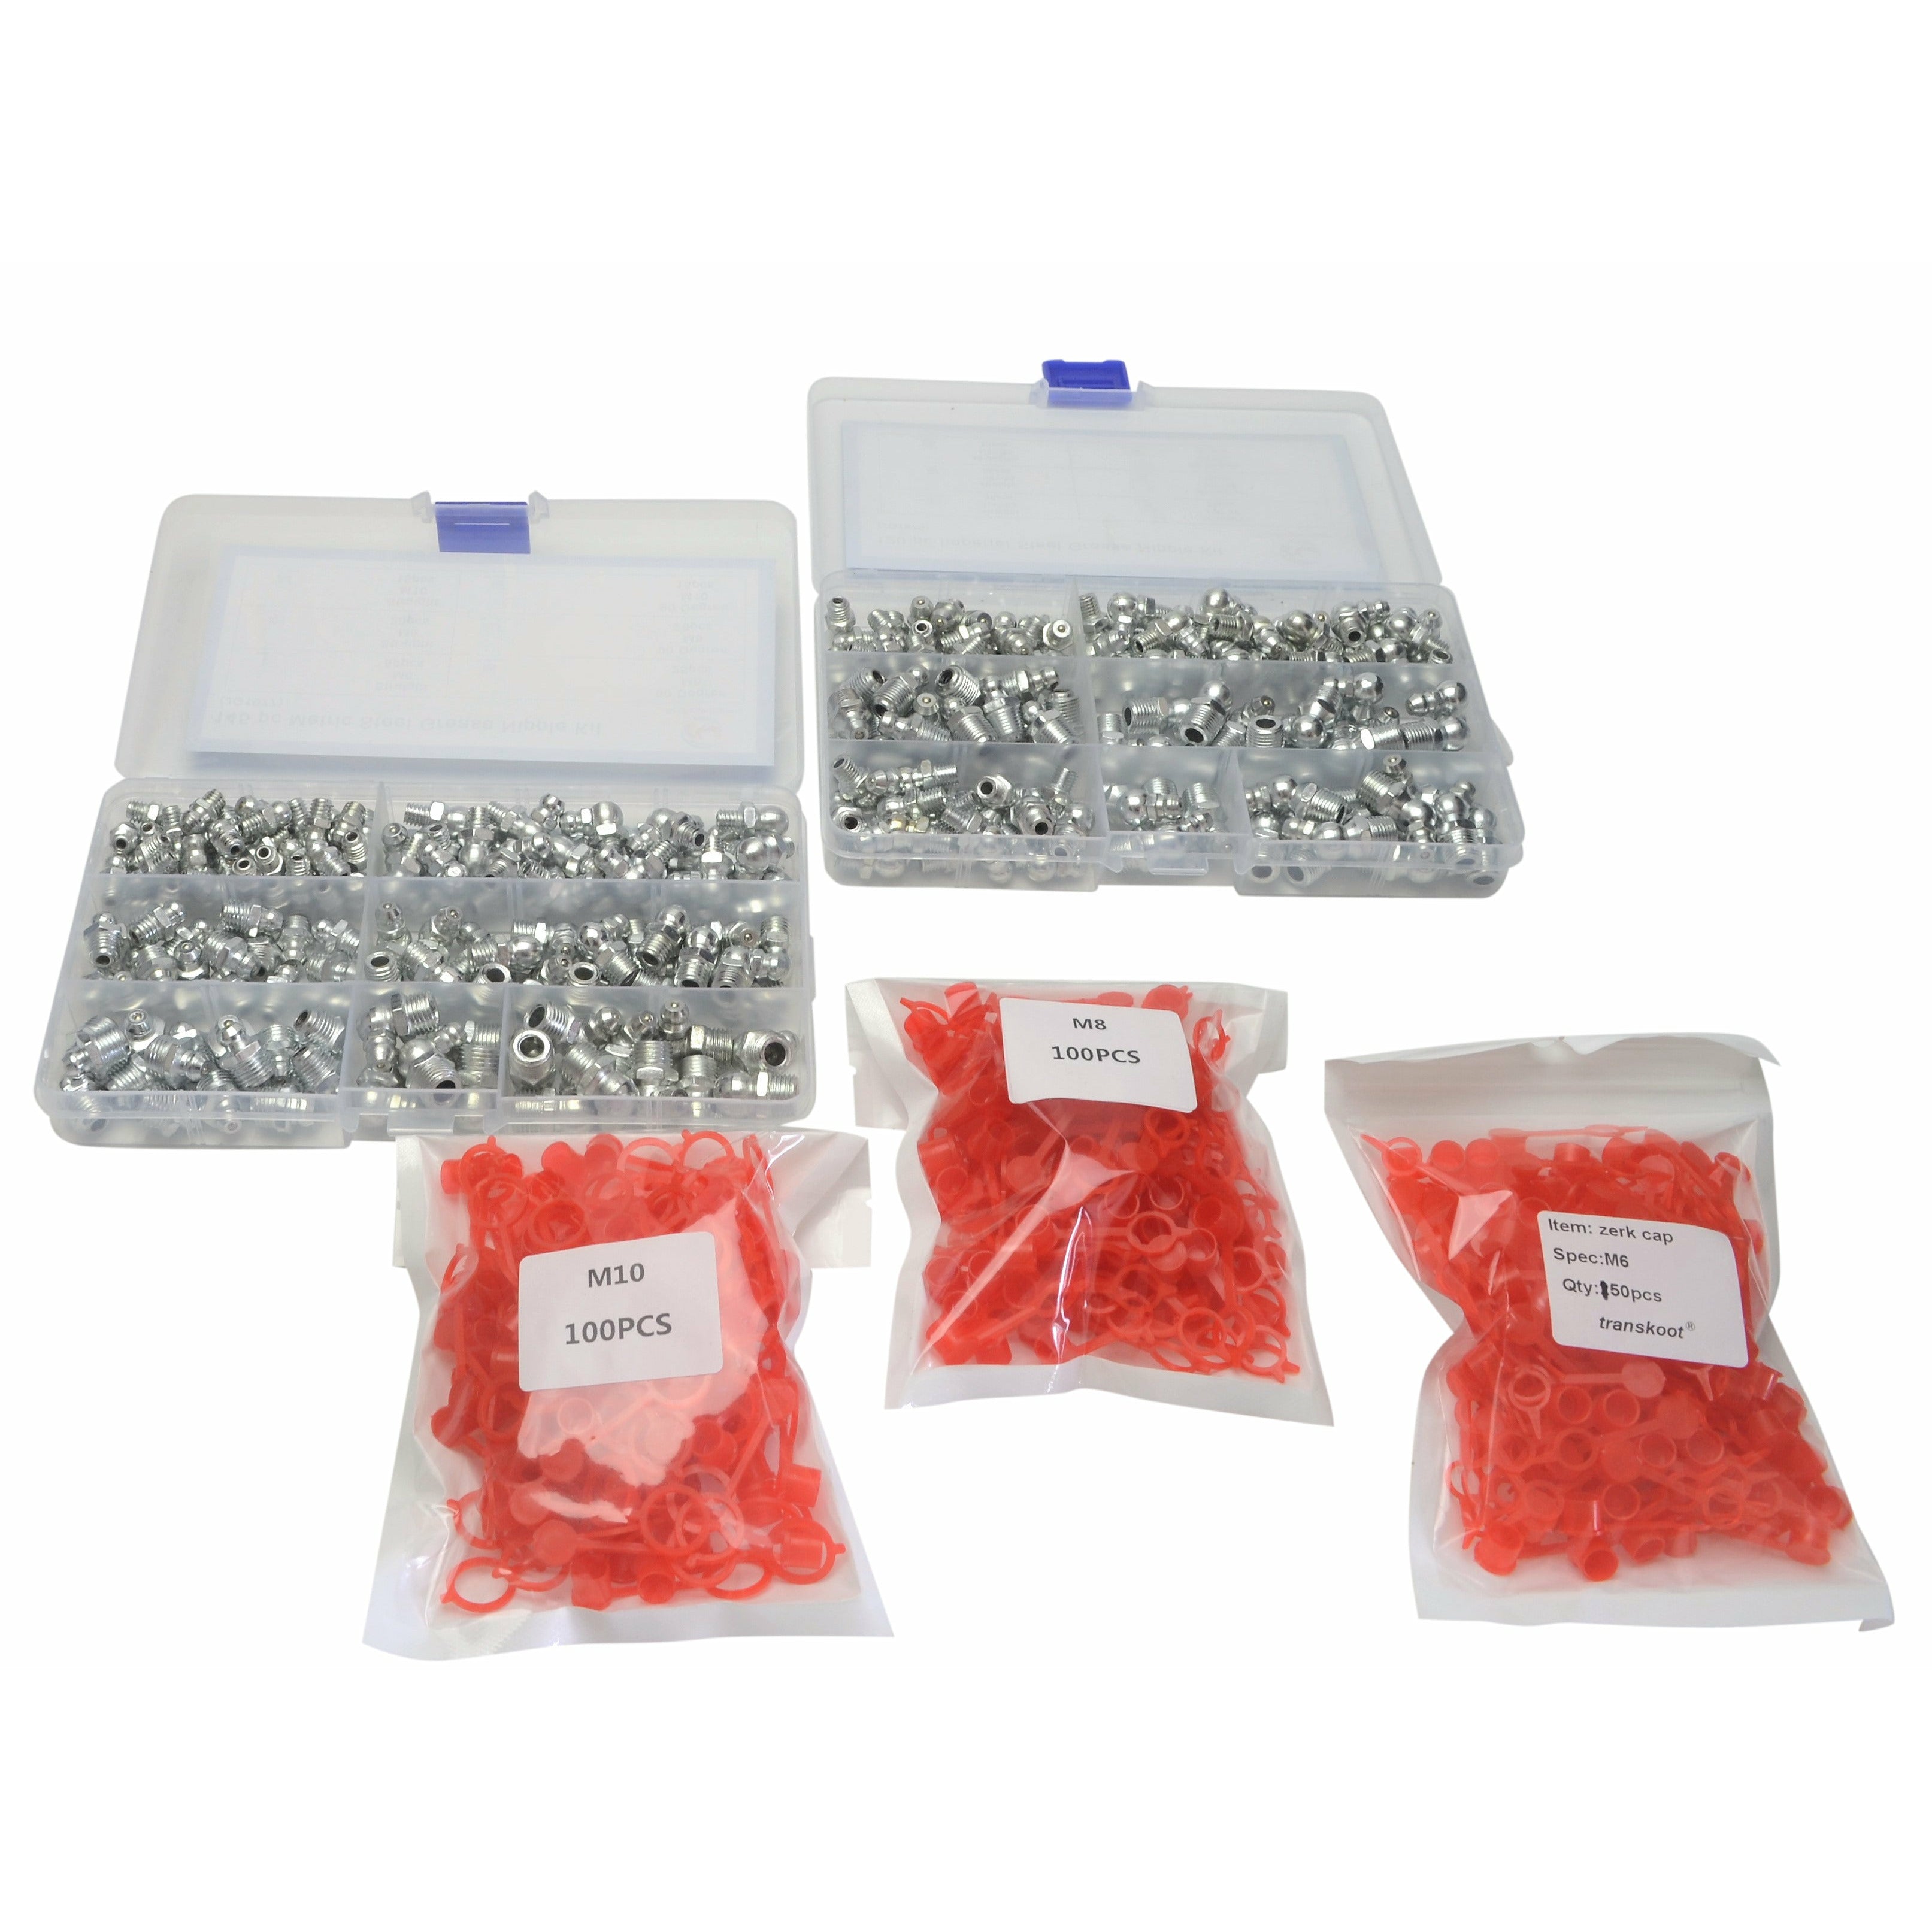 565 piece Grease Nipple Imperial and Metric Steel With Grease Caps Grab Kit Assortment